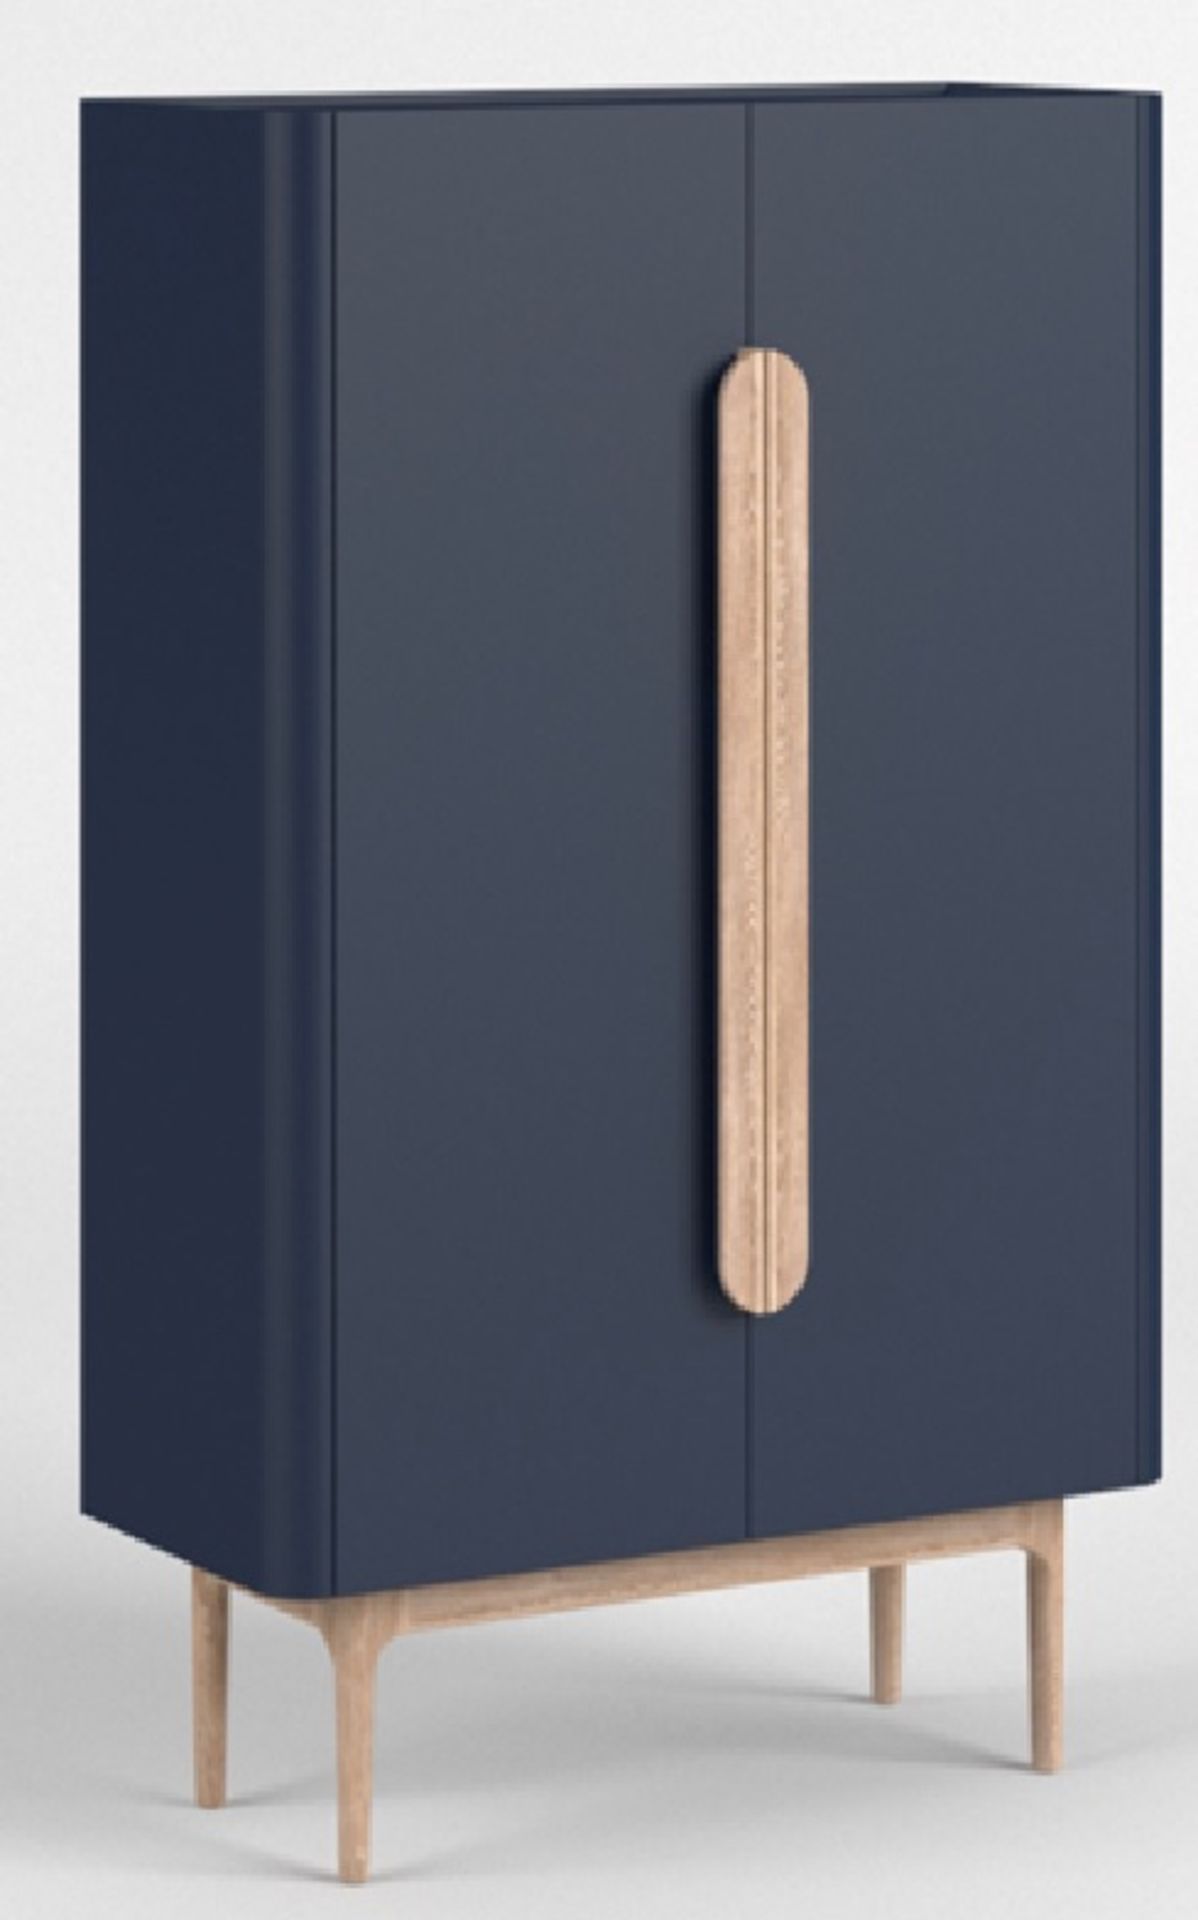 Horsen Scandi 2 Door Cabinet- Finished In Midnight Blue With Solid Oak Handles And Frame This